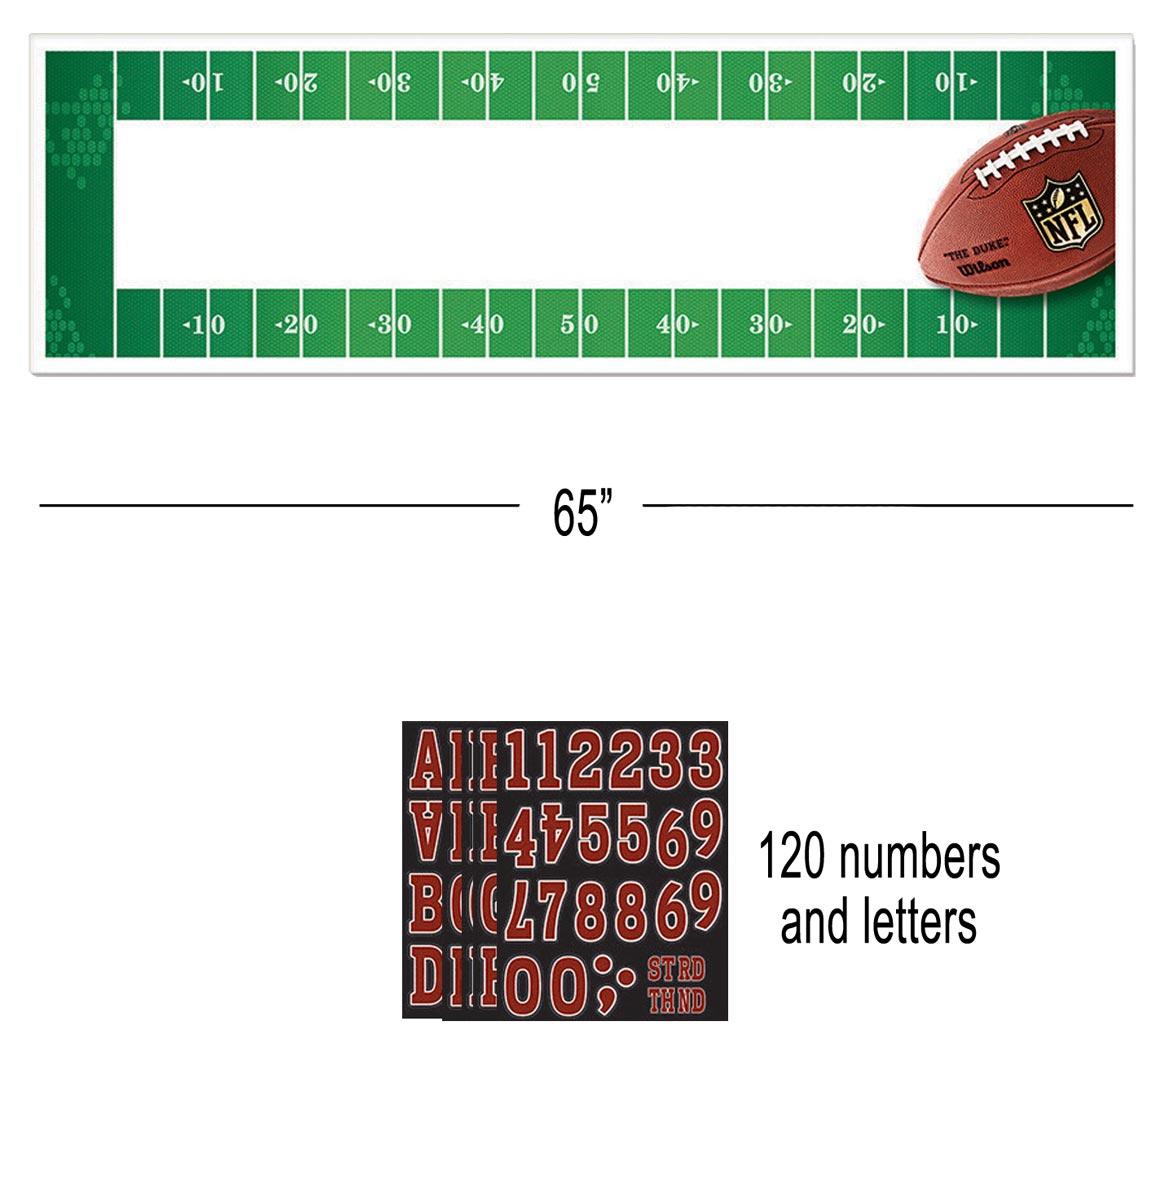 Personalised NFL American Football Party Banner Kit by Amscan 121214 available here at Karnival Costumes online NFL party shop